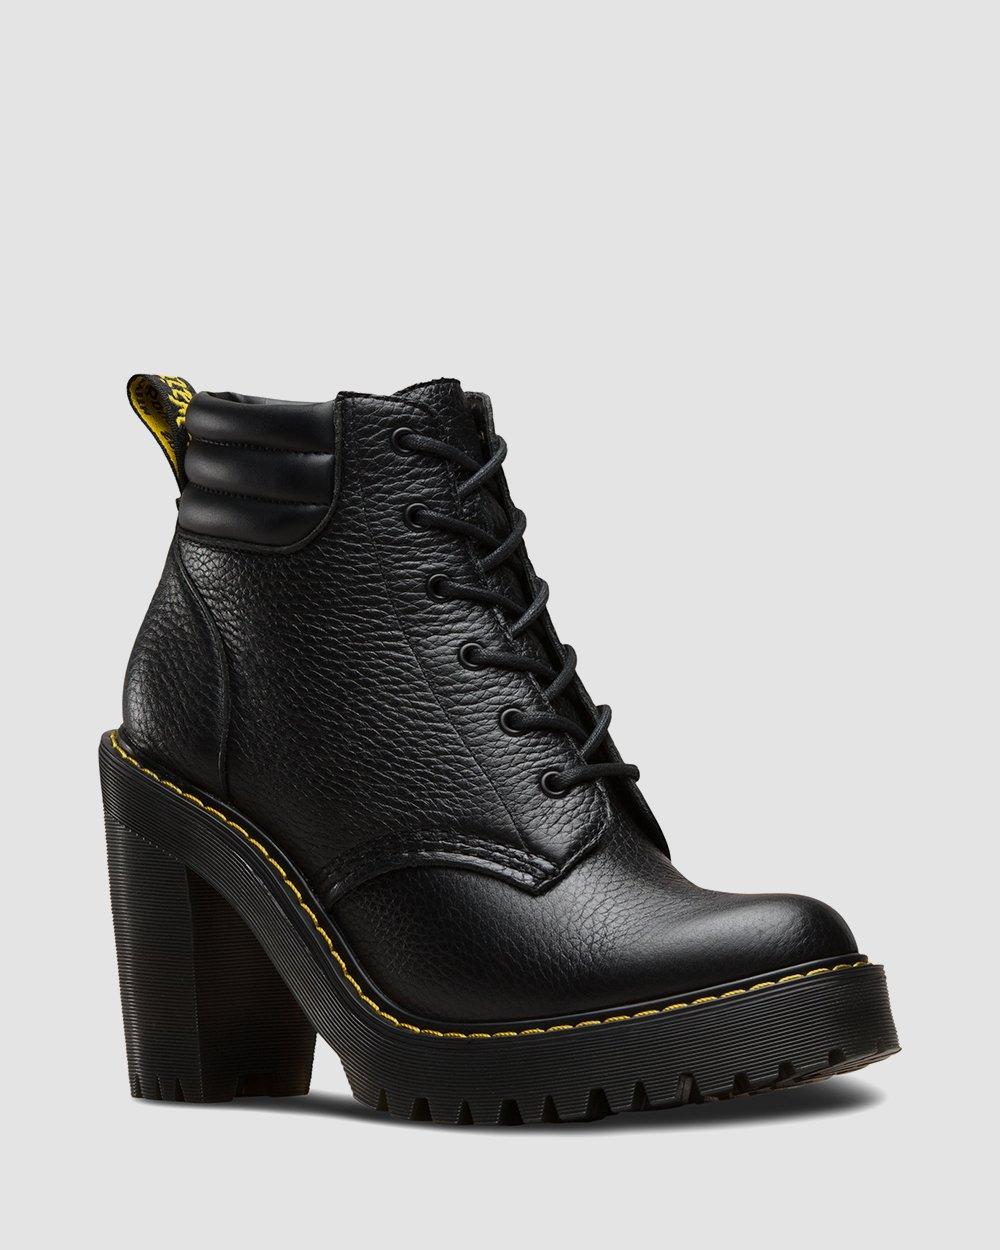 PERSEPHONE Milled Nappa, Black | Dr. Martens